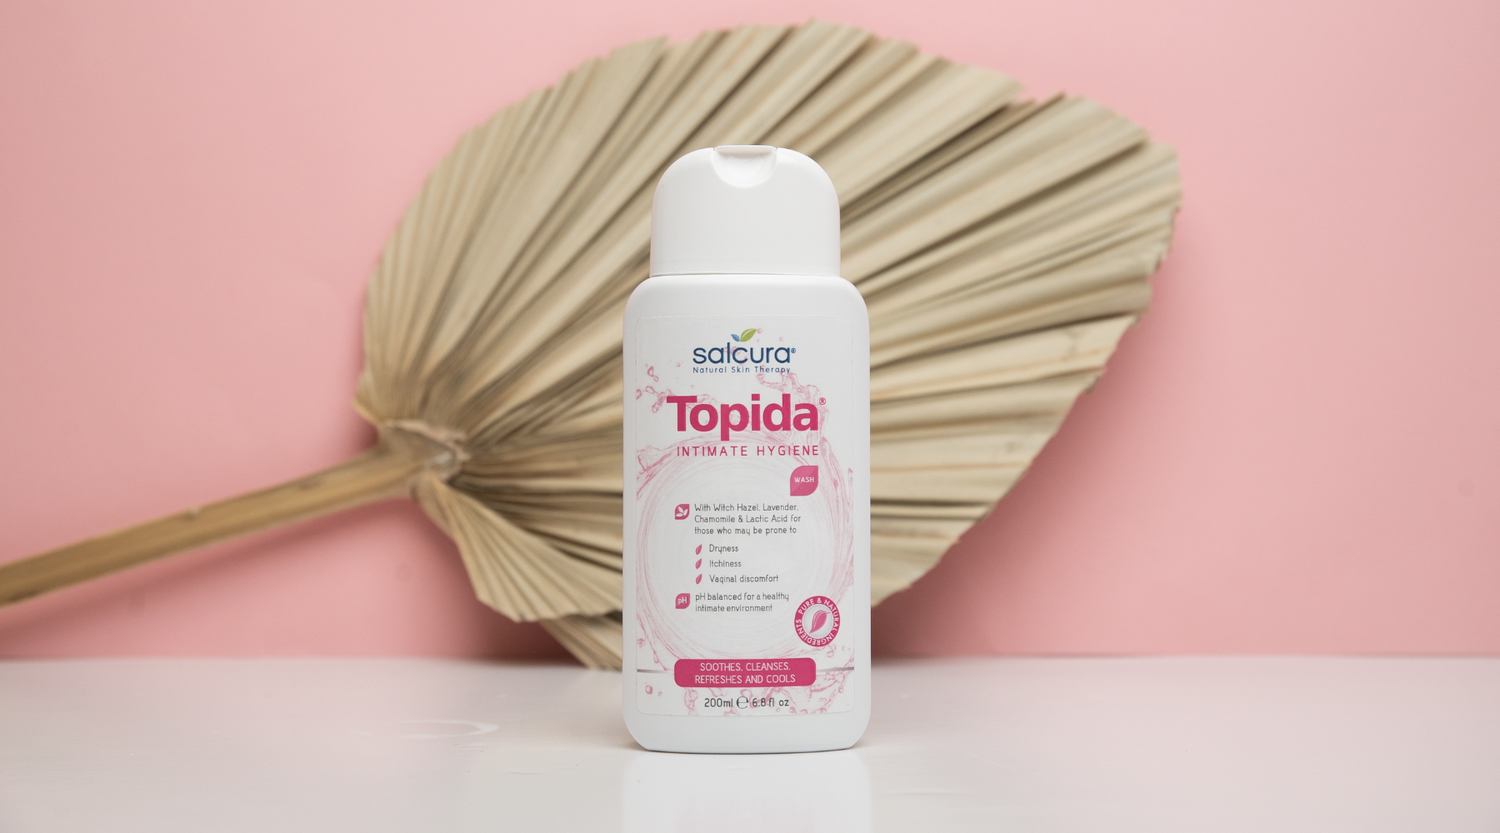 Introducing our NEW Topida Intimate Hygiene Wash!